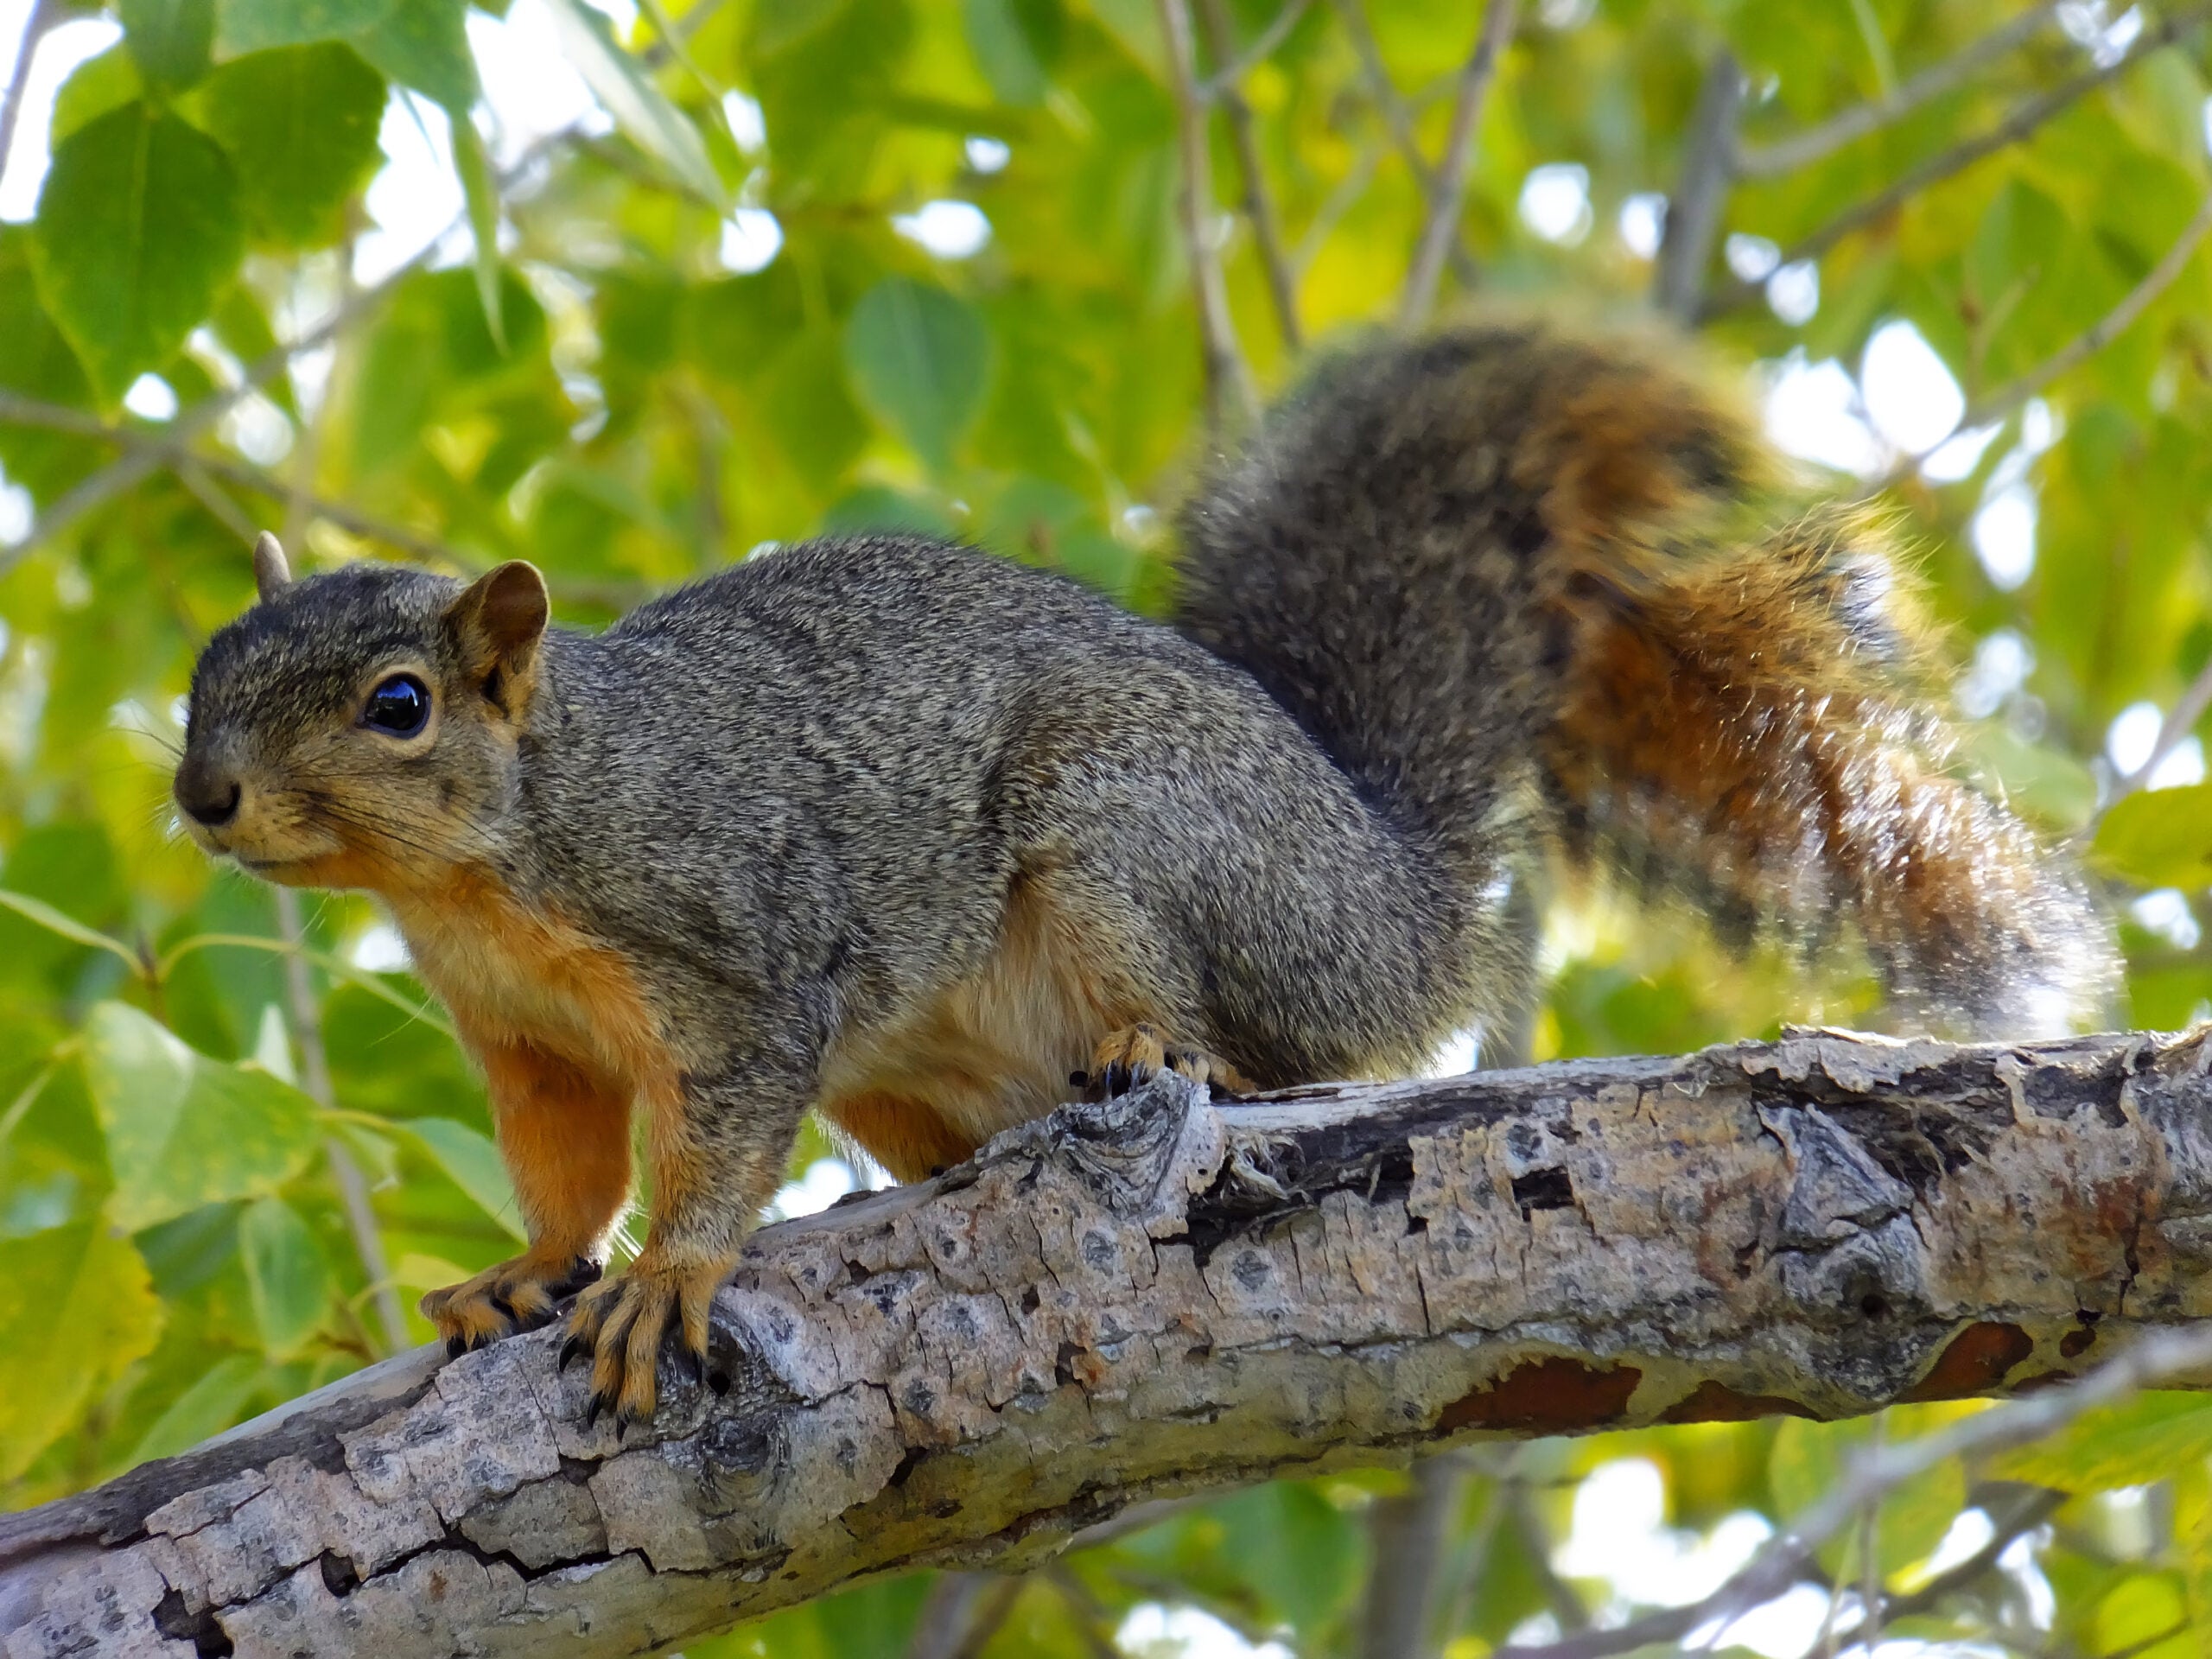 Squirrels are so organized it's nuts | Popular Science